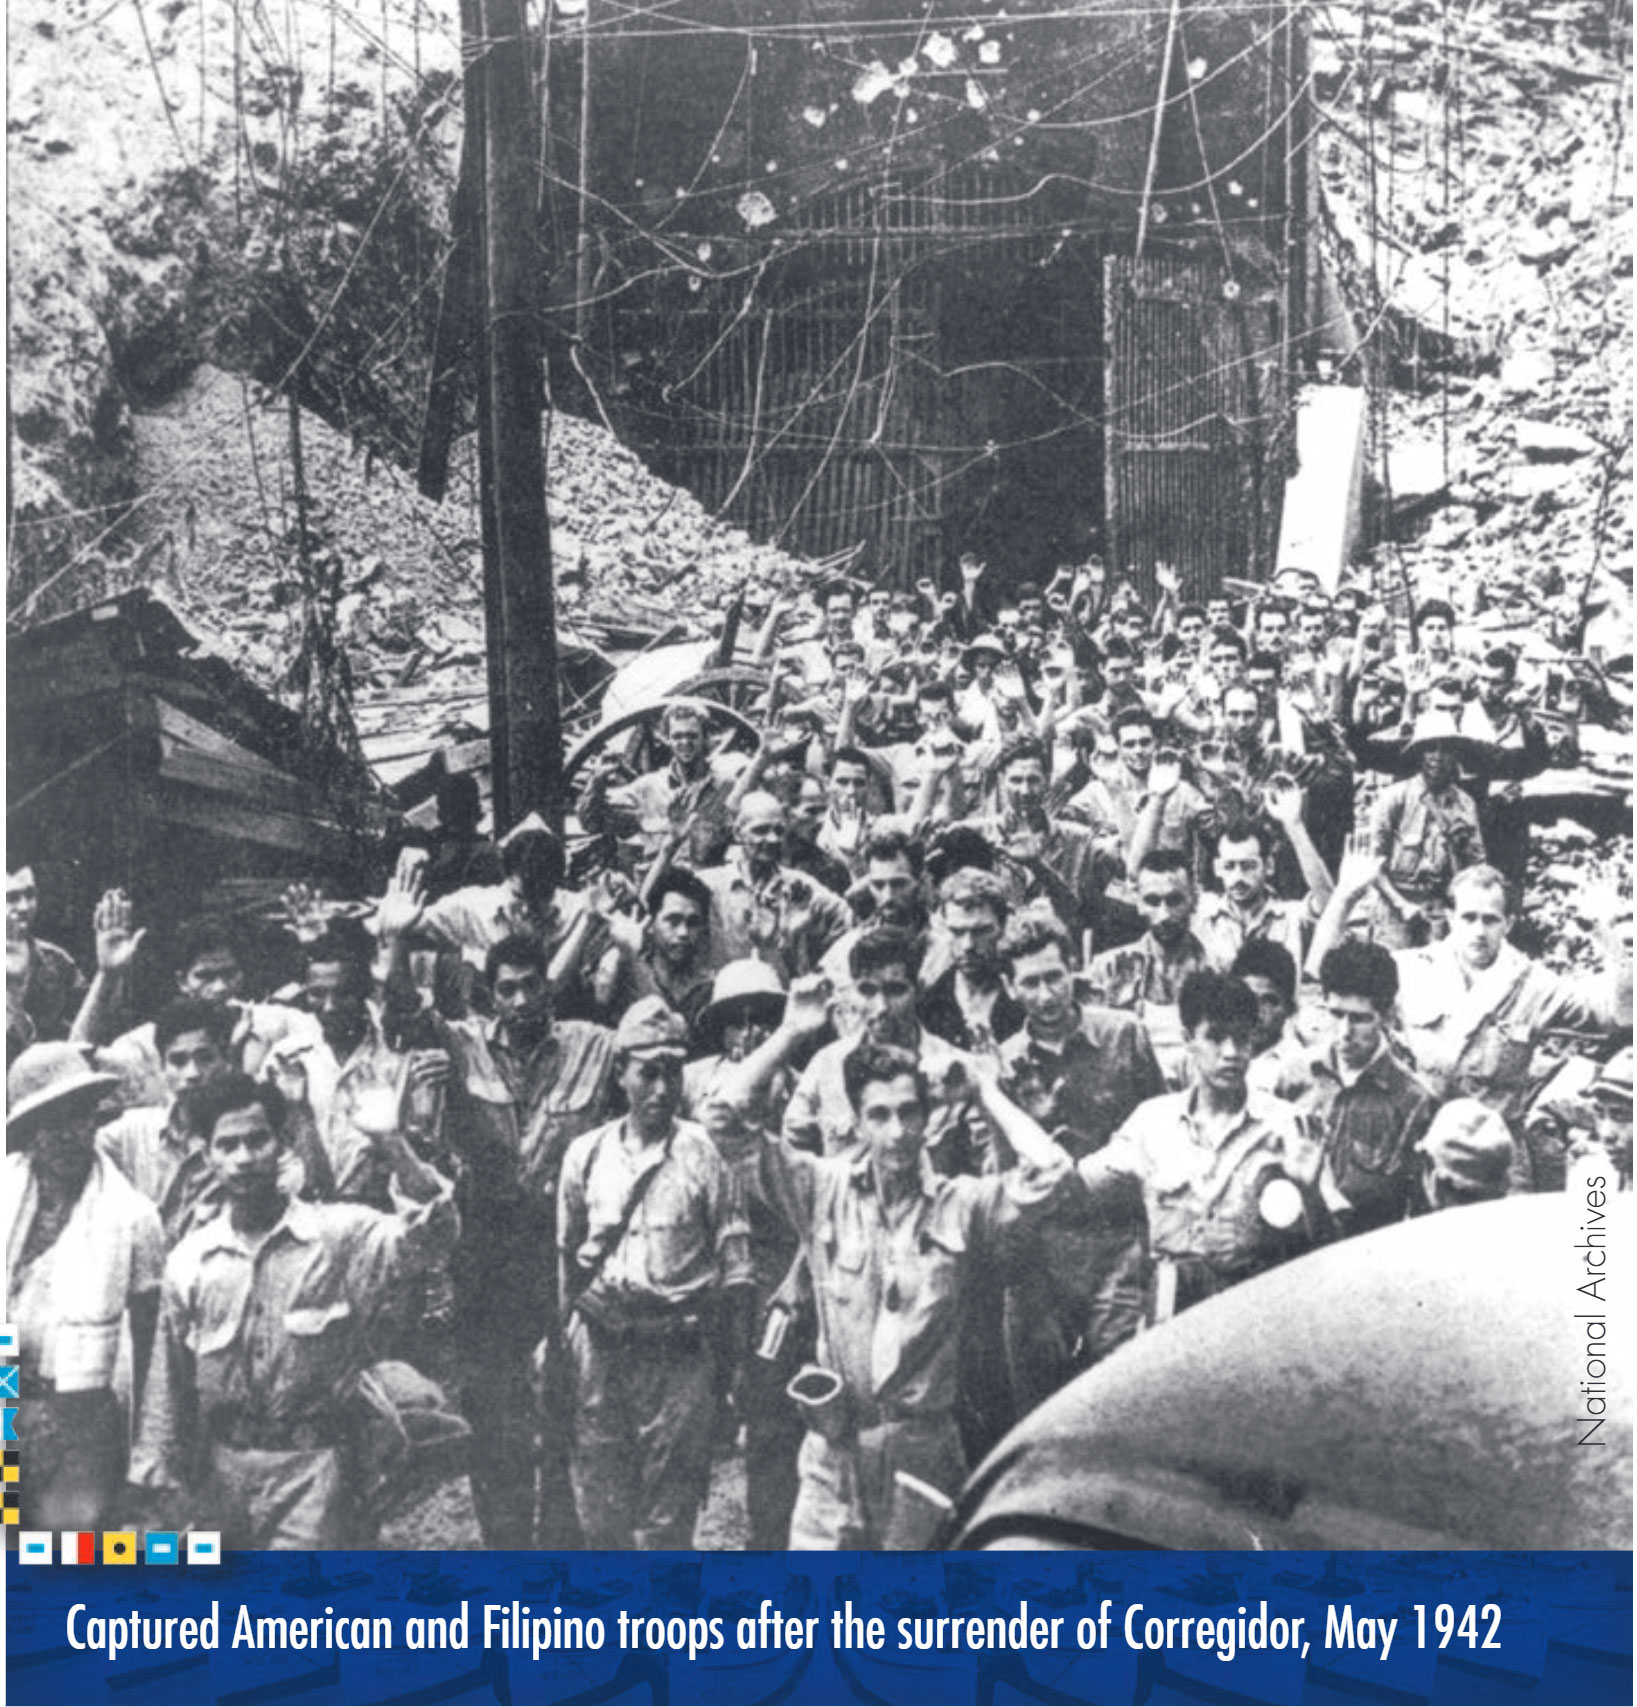 Captured American and Filipino troops after the surrender of Corregidor, May 1942 National Archives